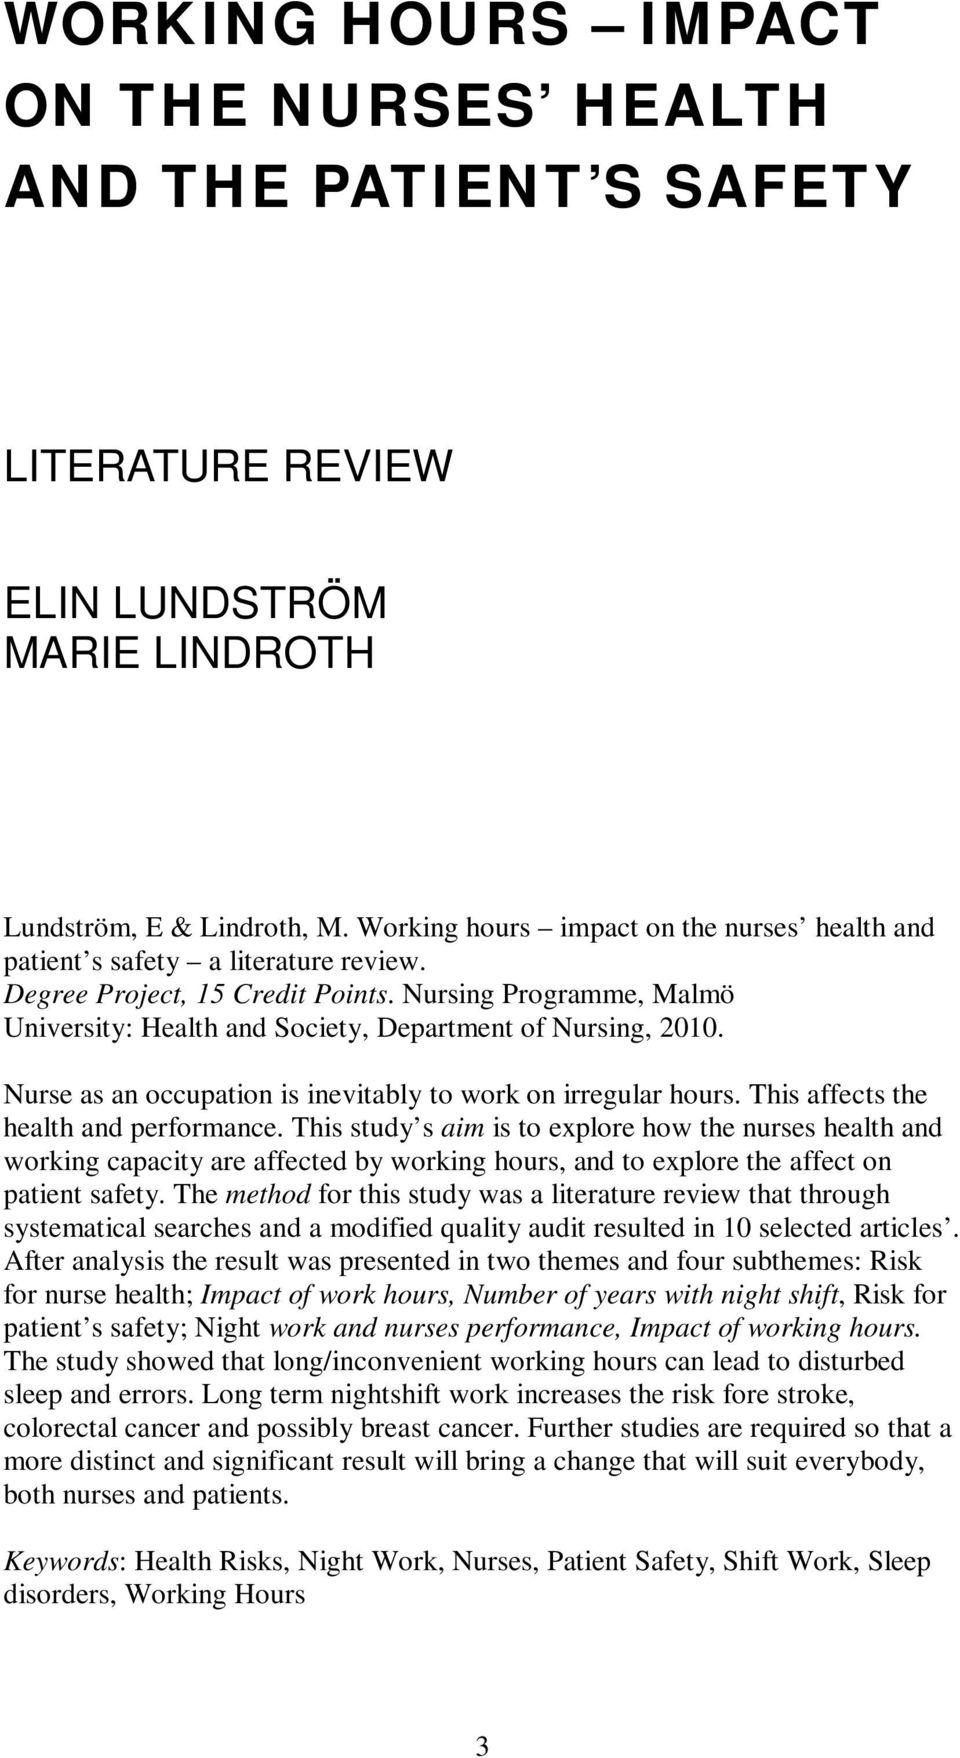 Nursing Programme, Malmö University: Health and Society, Department of Nursing, 2010. Nurse as an occupation is inevitably to work on irregular hours. This affects the health and performance.